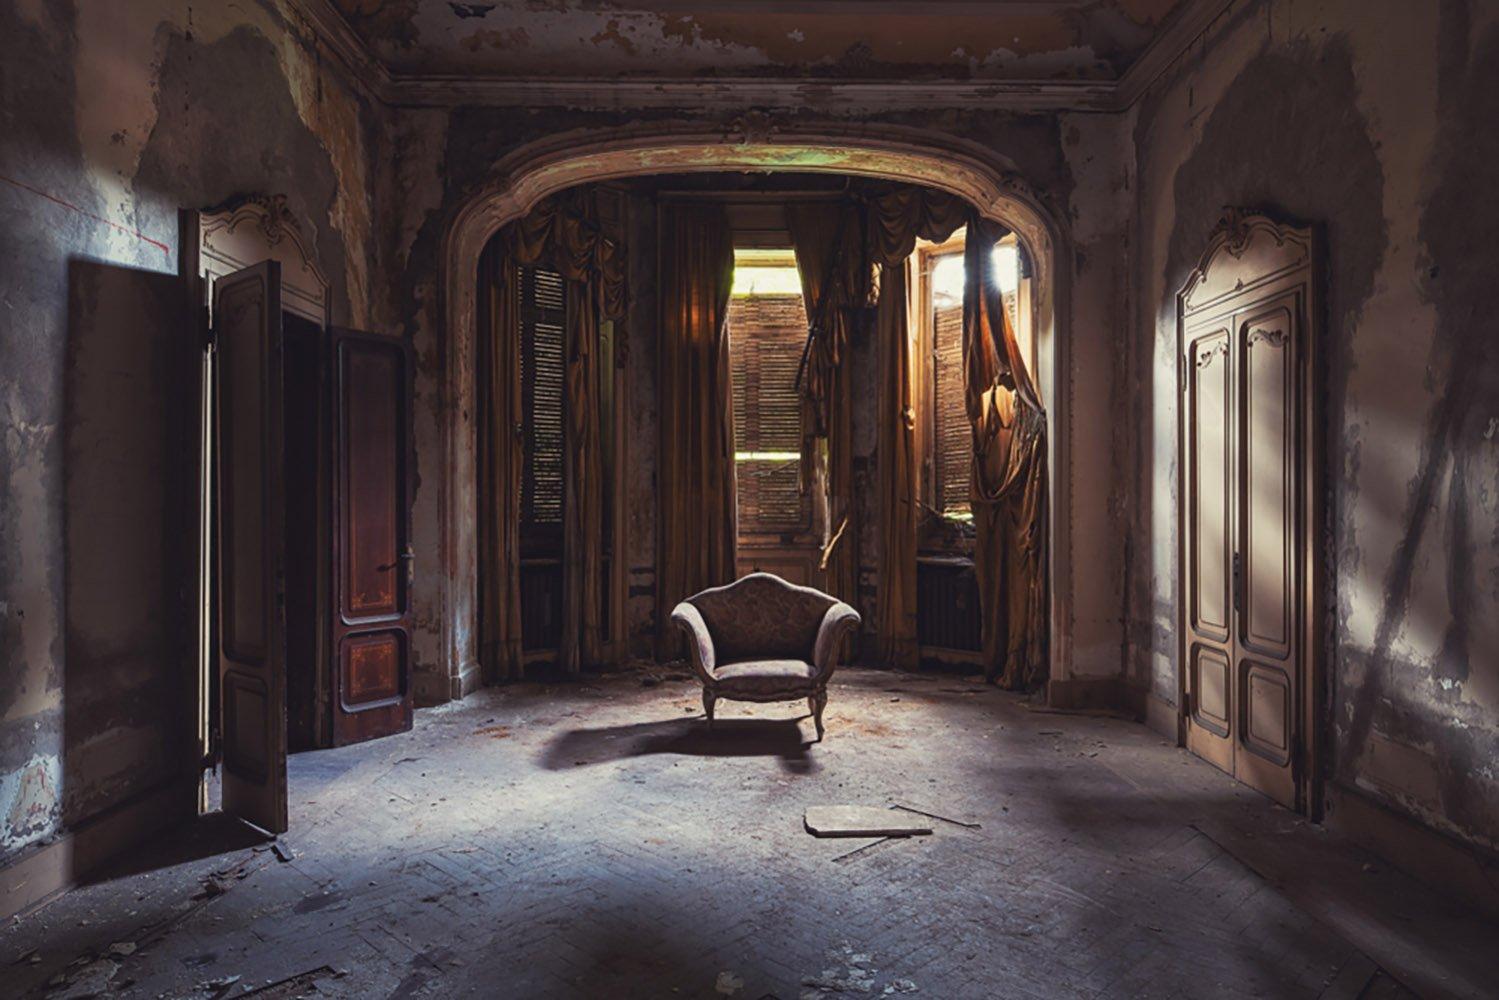 Isolamento is a limited-edition photograph by contemporary artist Gina Soden. It is part of the “How Long Is Now?” series.

This photograph is sold unframed as a print only. It is available in 2 dimensions:
*44.64 cm × 64.96 cm (17.6" × 25.6"),